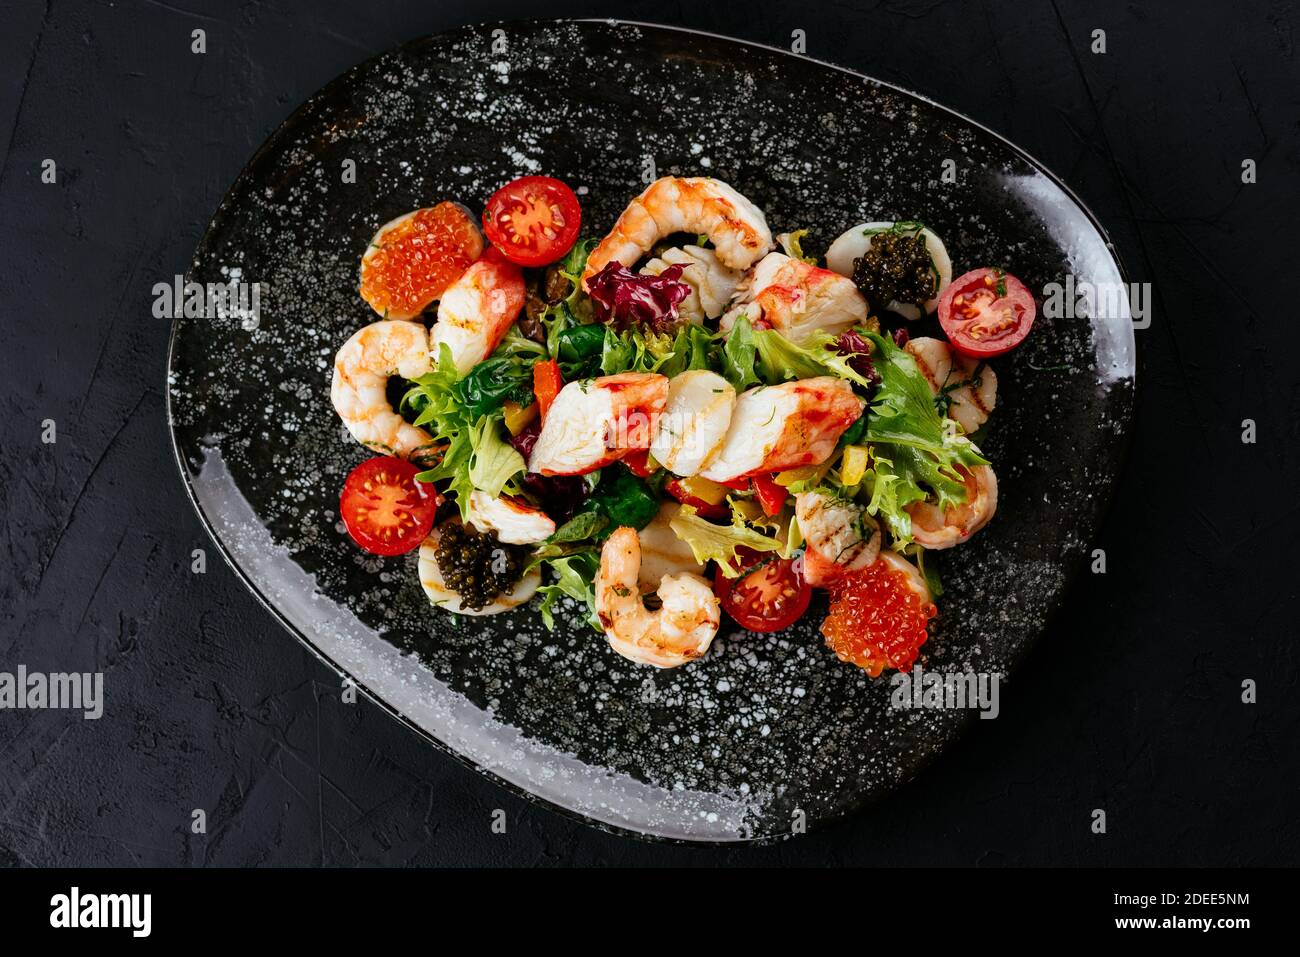 salad with shrimp, vegetables and crab meat on a black background Stock Photo